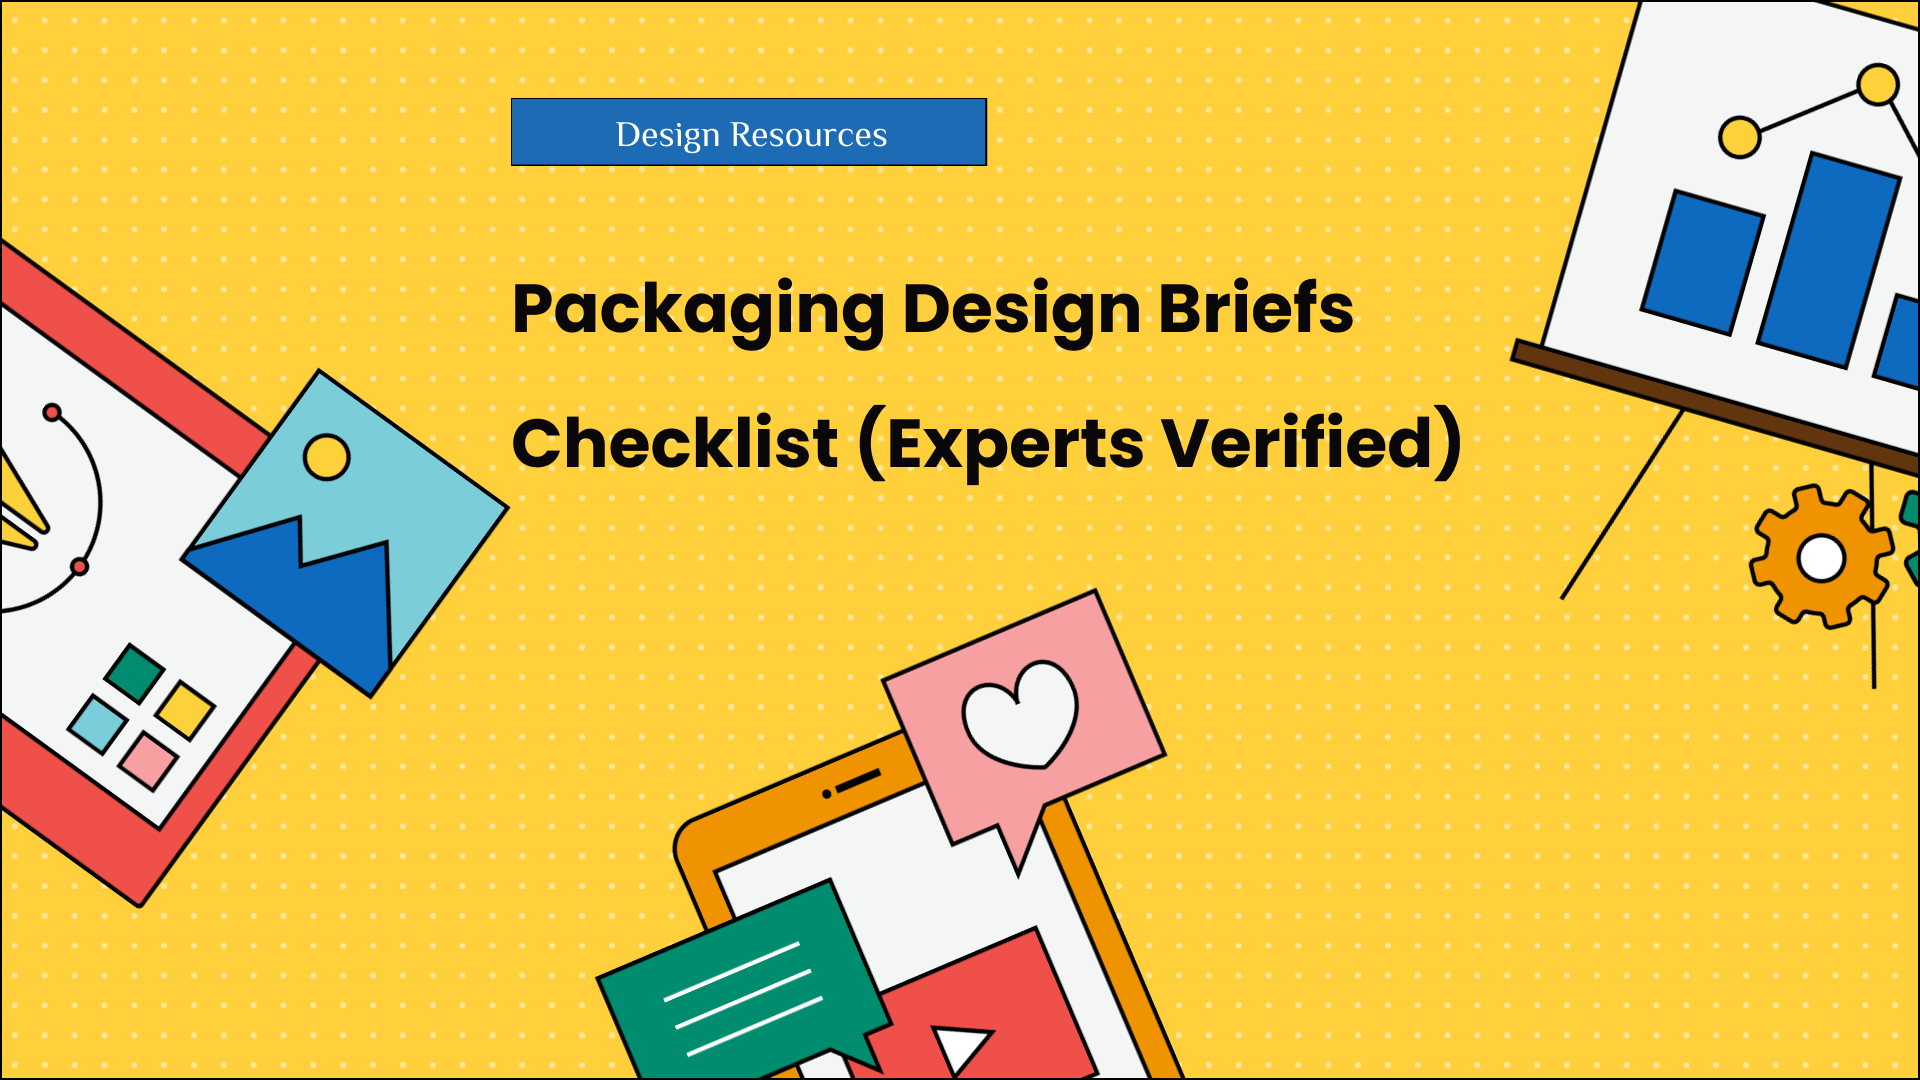 Packaging Design Briefs Checklist (Experts Verified) by GoVisually